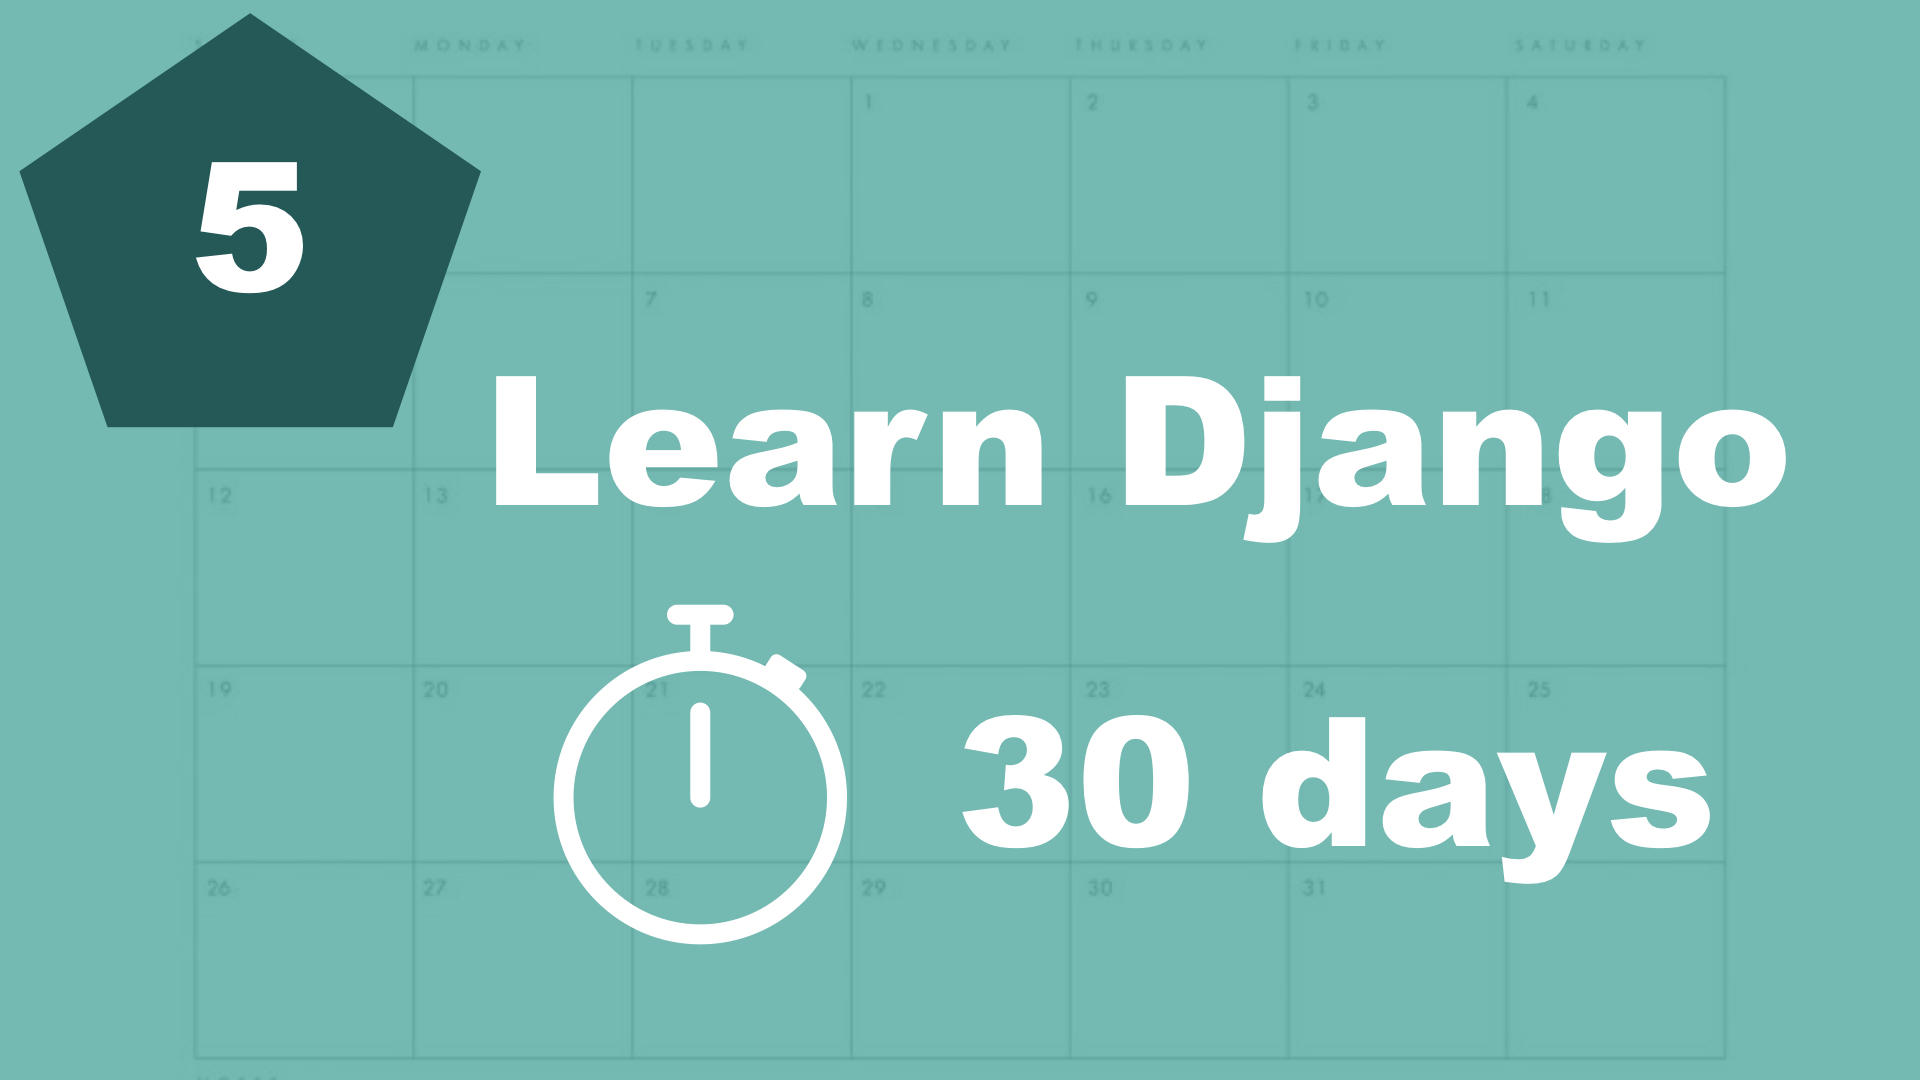 Your first view - 30 days of Django